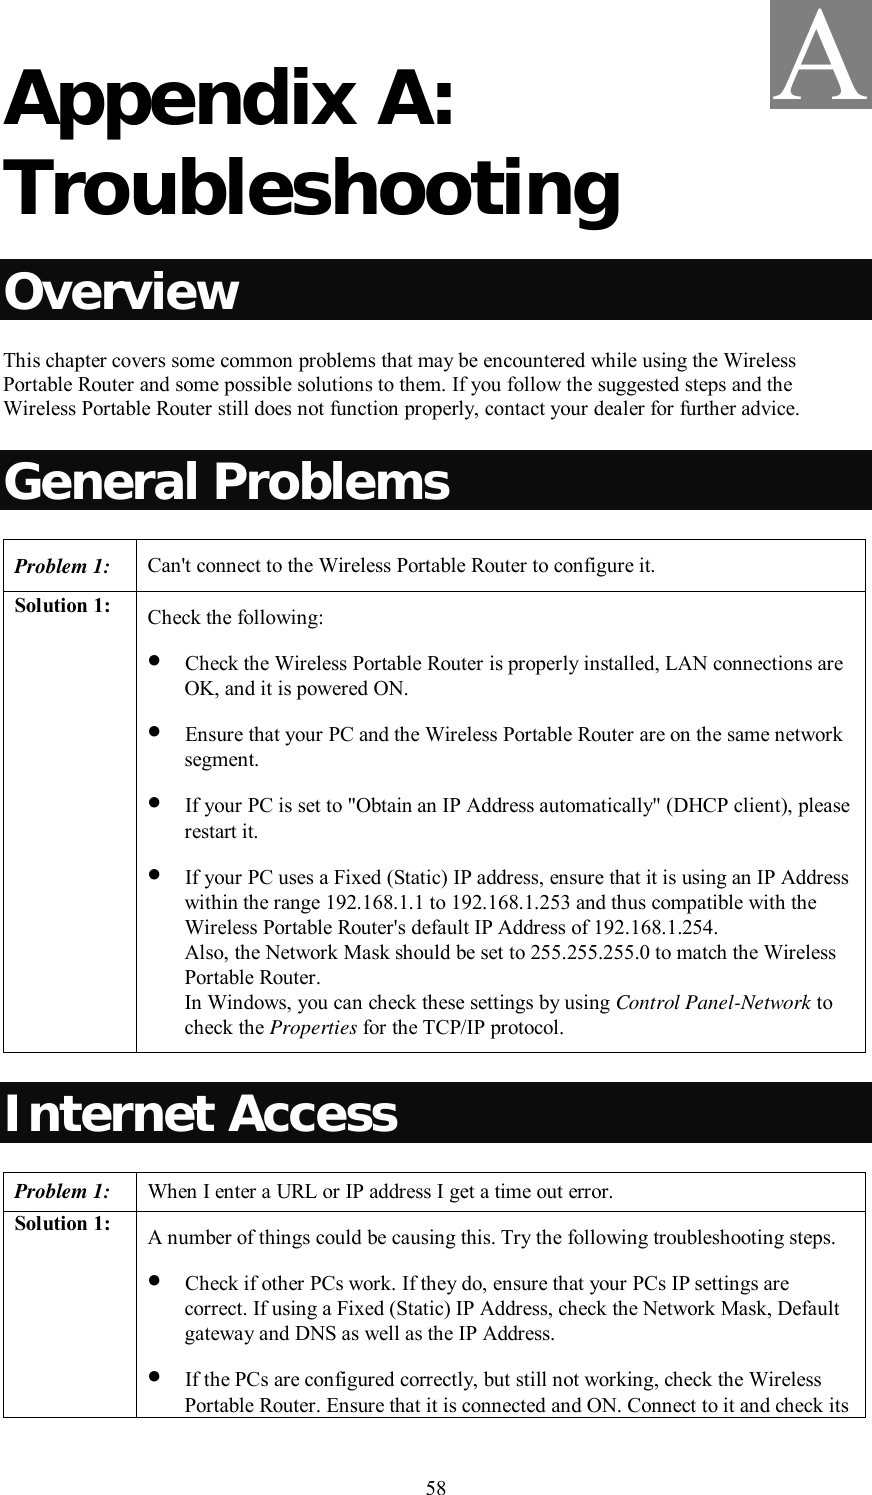    58  Appendix A: Troubleshooting Overview This chapter covers some common problems that may be encountered while using the Wireless Portable Router and some possible solutions to them. If you follow the suggested steps and the Wireless Portable Router still does not function properly, contact your dealer for further advice. General Problems Problem 1:  Can&apos;t connect to the Wireless Portable Router to configure it. Solution 1:  Check the following: • Check the Wireless Portable Router is properly installed, LAN connections are OK, and it is powered ON. • Ensure that your PC and the Wireless Portable Router are on the same network segment.  • If your PC is set to &quot;Obtain an IP Address automatically&quot; (DHCP client), please restart it. • If your PC uses a Fixed (Static) IP address, ensure that it is using an IP Address within the range 192.168.1.1 to 192.168.1.253 and thus compatible with the Wireless Portable Router&apos;s default IP Address of 192.168.1.254.  Also, the Network Mask should be set to 255.255.255.0 to match the Wireless Portable Router. In Windows, you can check these settings by using Control Panel-Network to check the Properties for the TCP/IP protocol.  Internet Access Problem 1: When I enter a URL or IP address I get a time out error. Solution 1:  A number of things could be causing this. Try the following troubleshooting steps. • Check if other PCs work. If they do, ensure that your PCs IP settings are correct. If using a Fixed (Static) IP Address, check the Network Mask, Default gateway and DNS as well as the IP Address. • If the PCs are configured correctly, but still not working, check the Wireless Portable Router. Ensure that it is connected and ON. Connect to it and check its A 